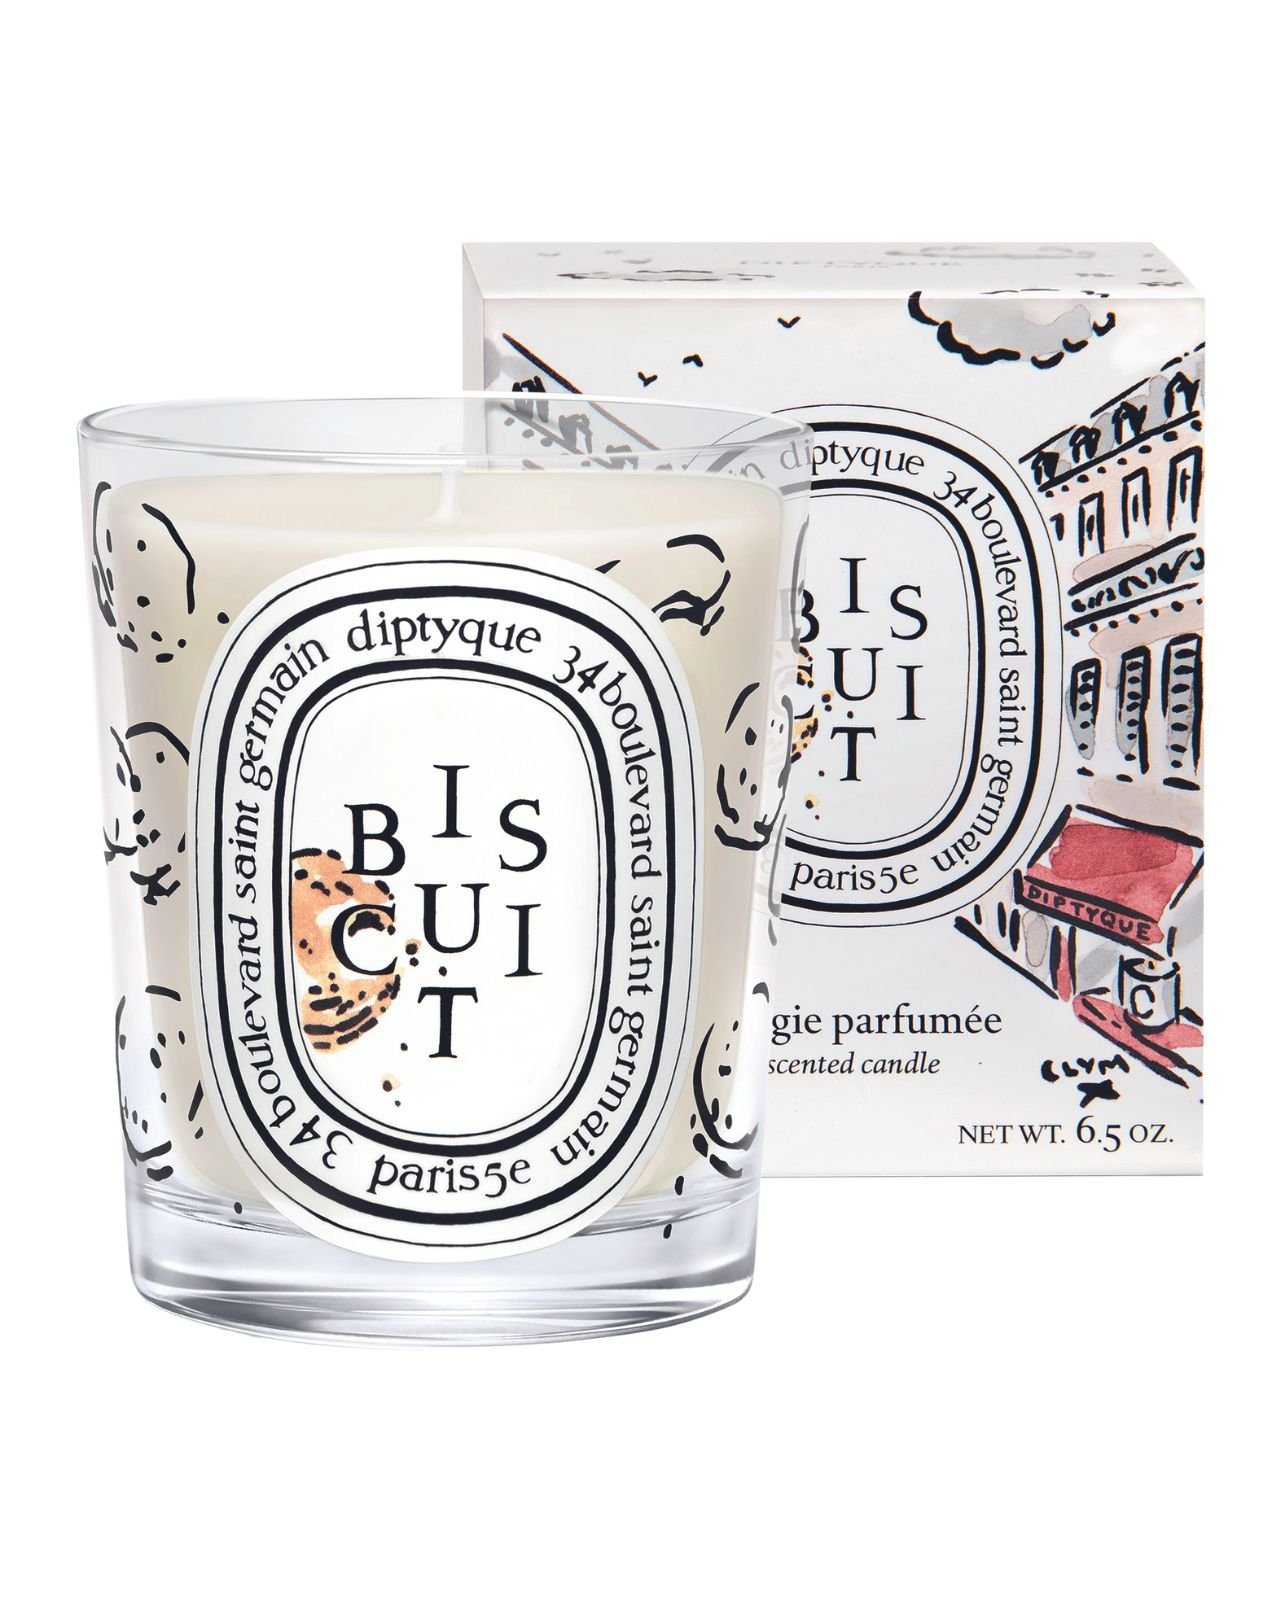 Diptyque biscuit scented candle with illustrated box